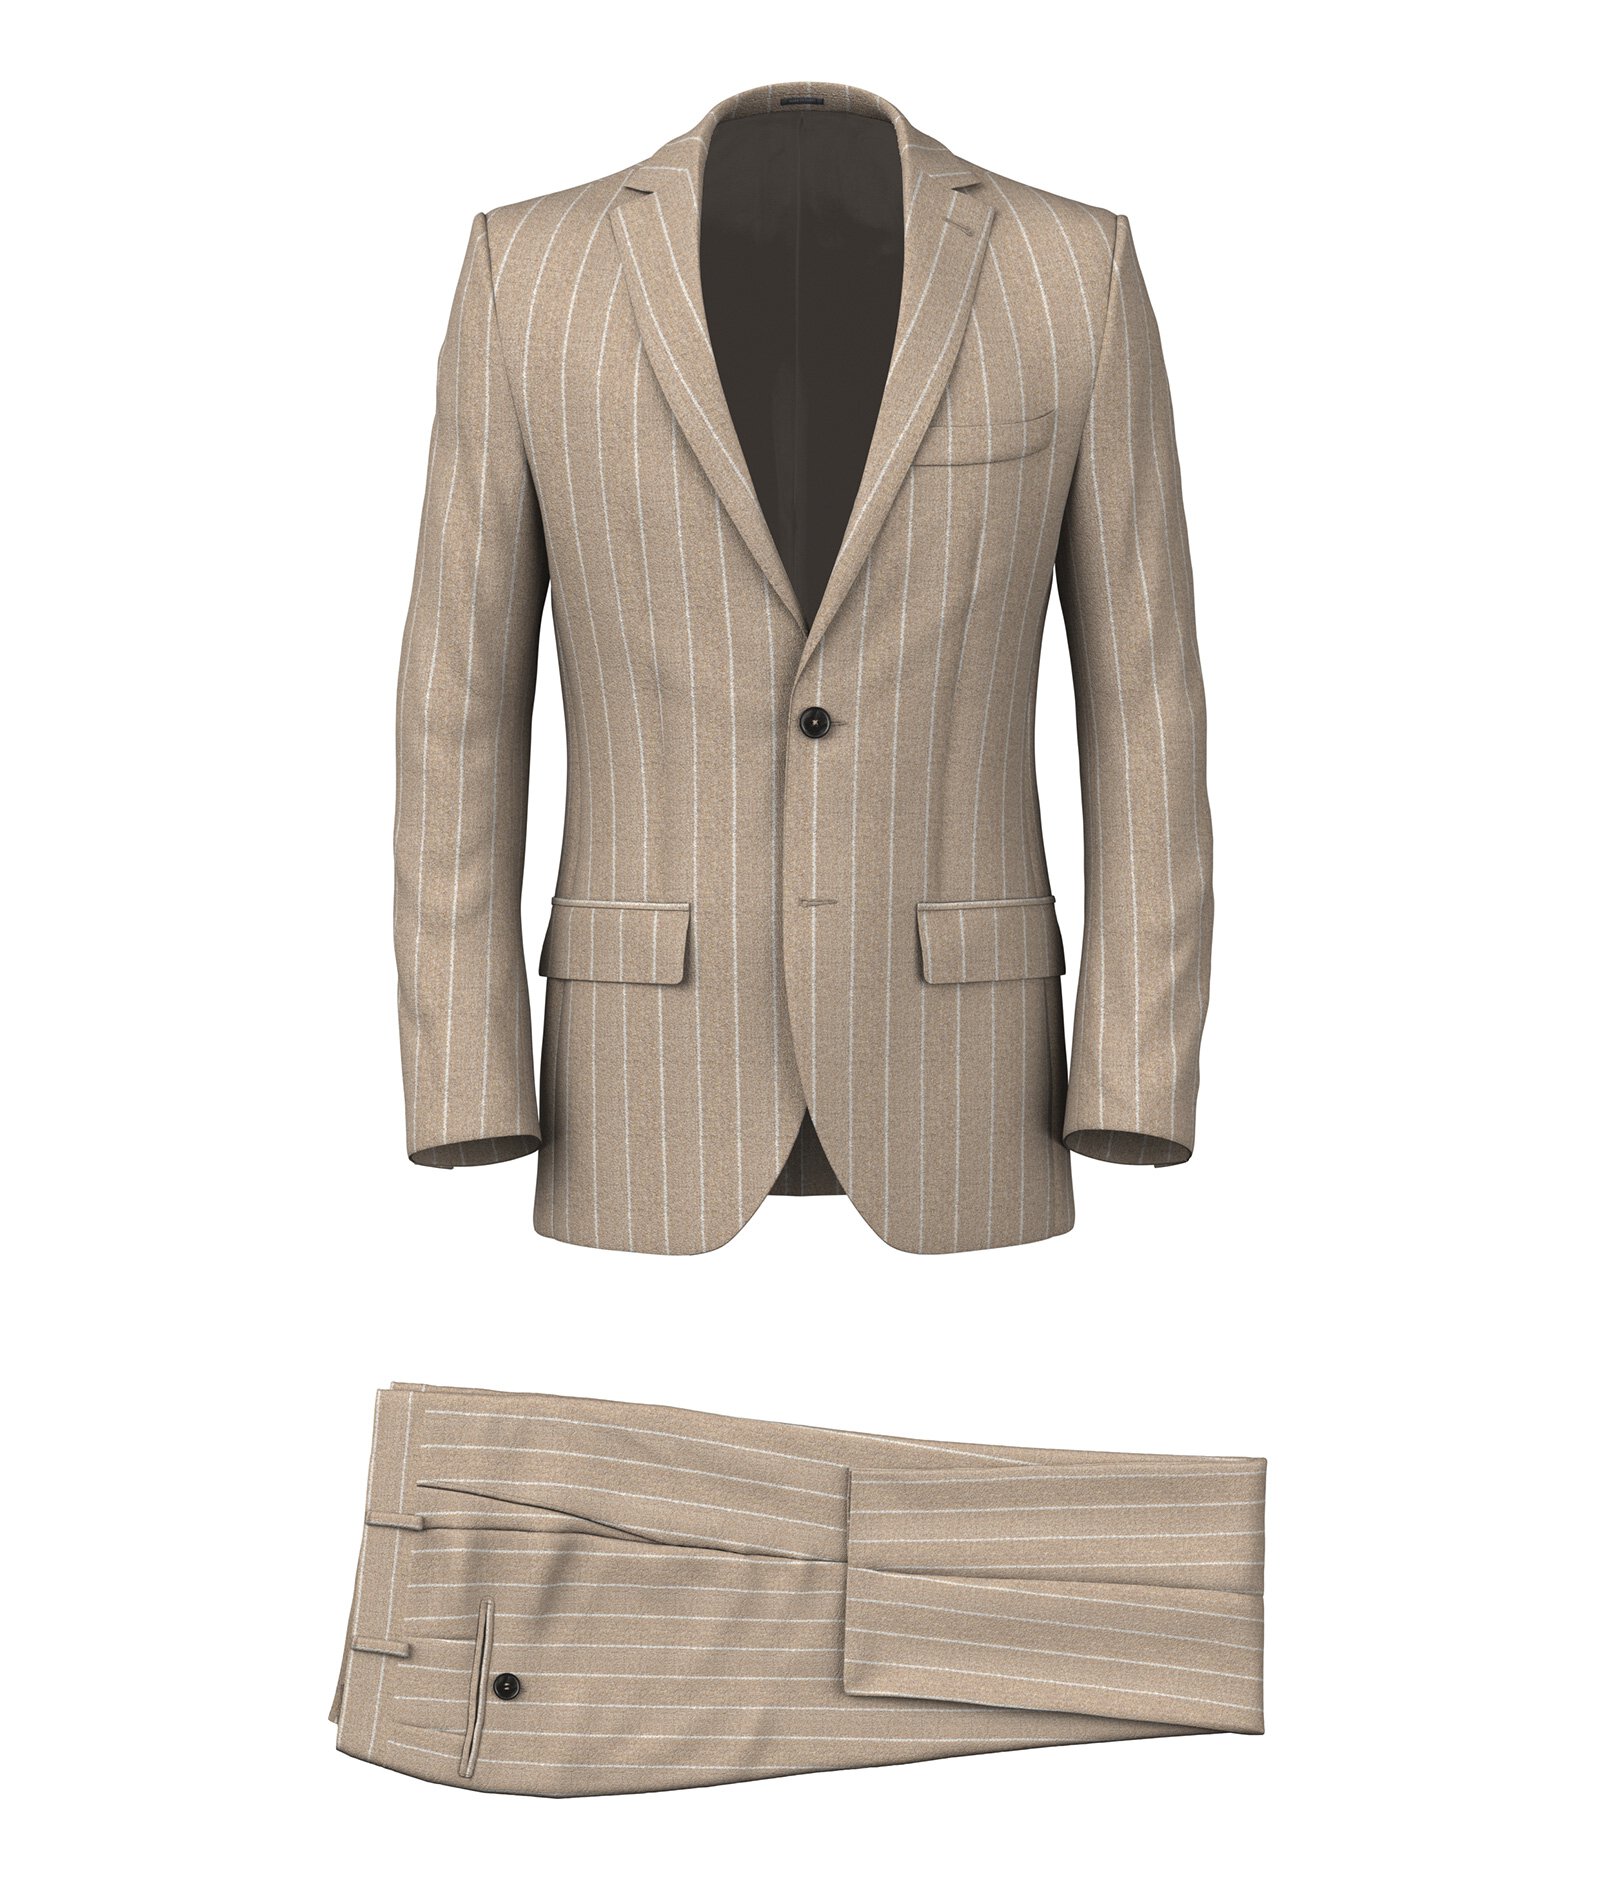 Women's Beige Suits, Made to Measure